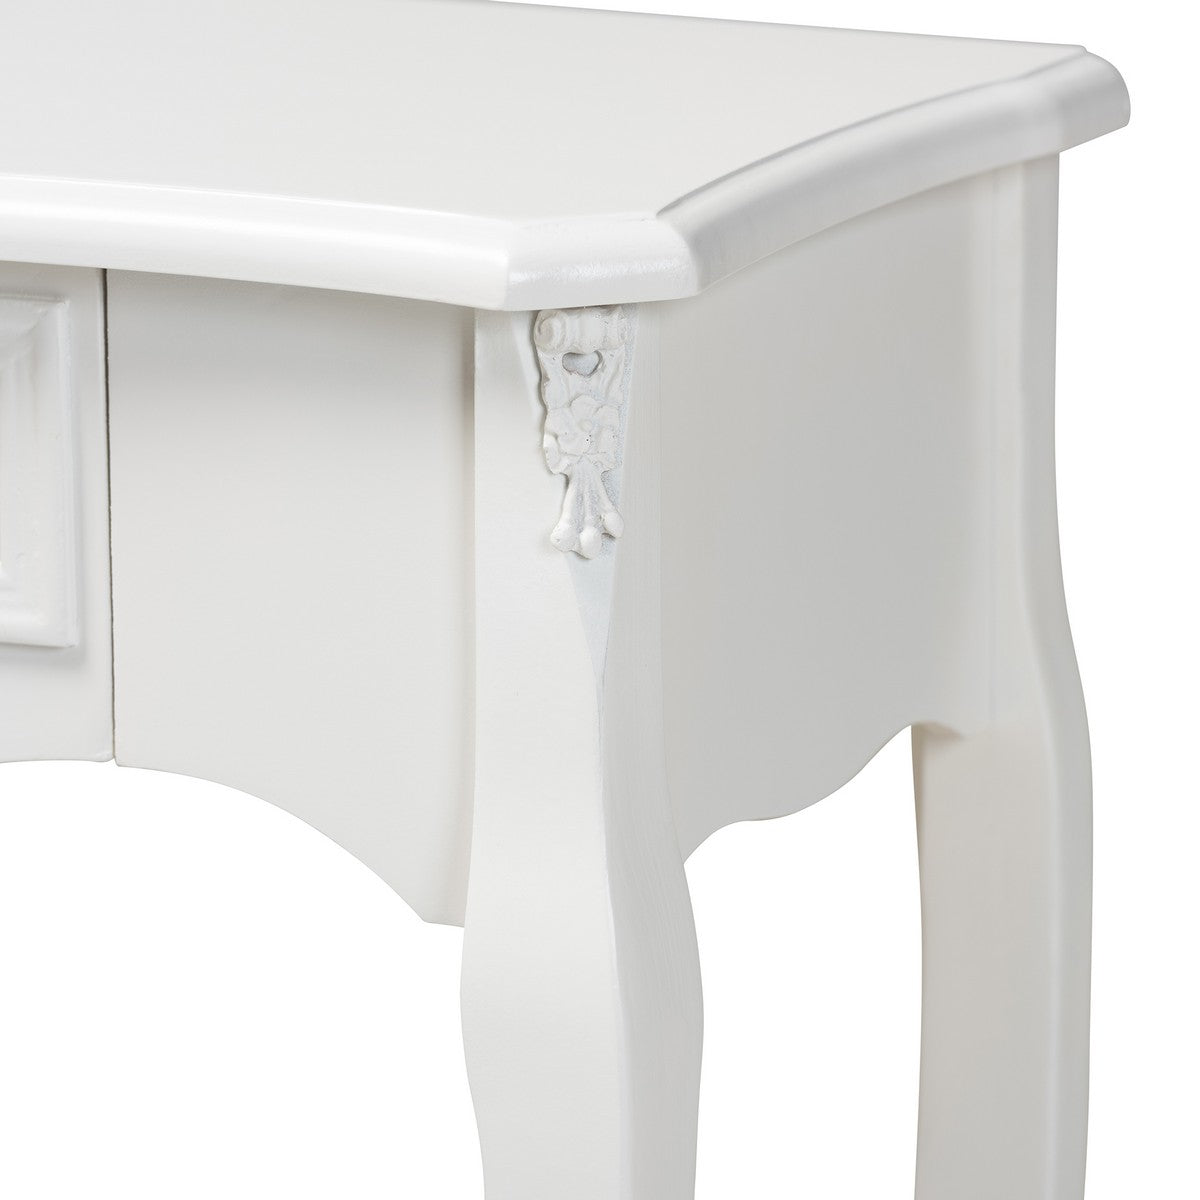 Baxton Studio Gabrielle Traditional French Country Provincial White-Finished 1-Drawer Wood Console Table